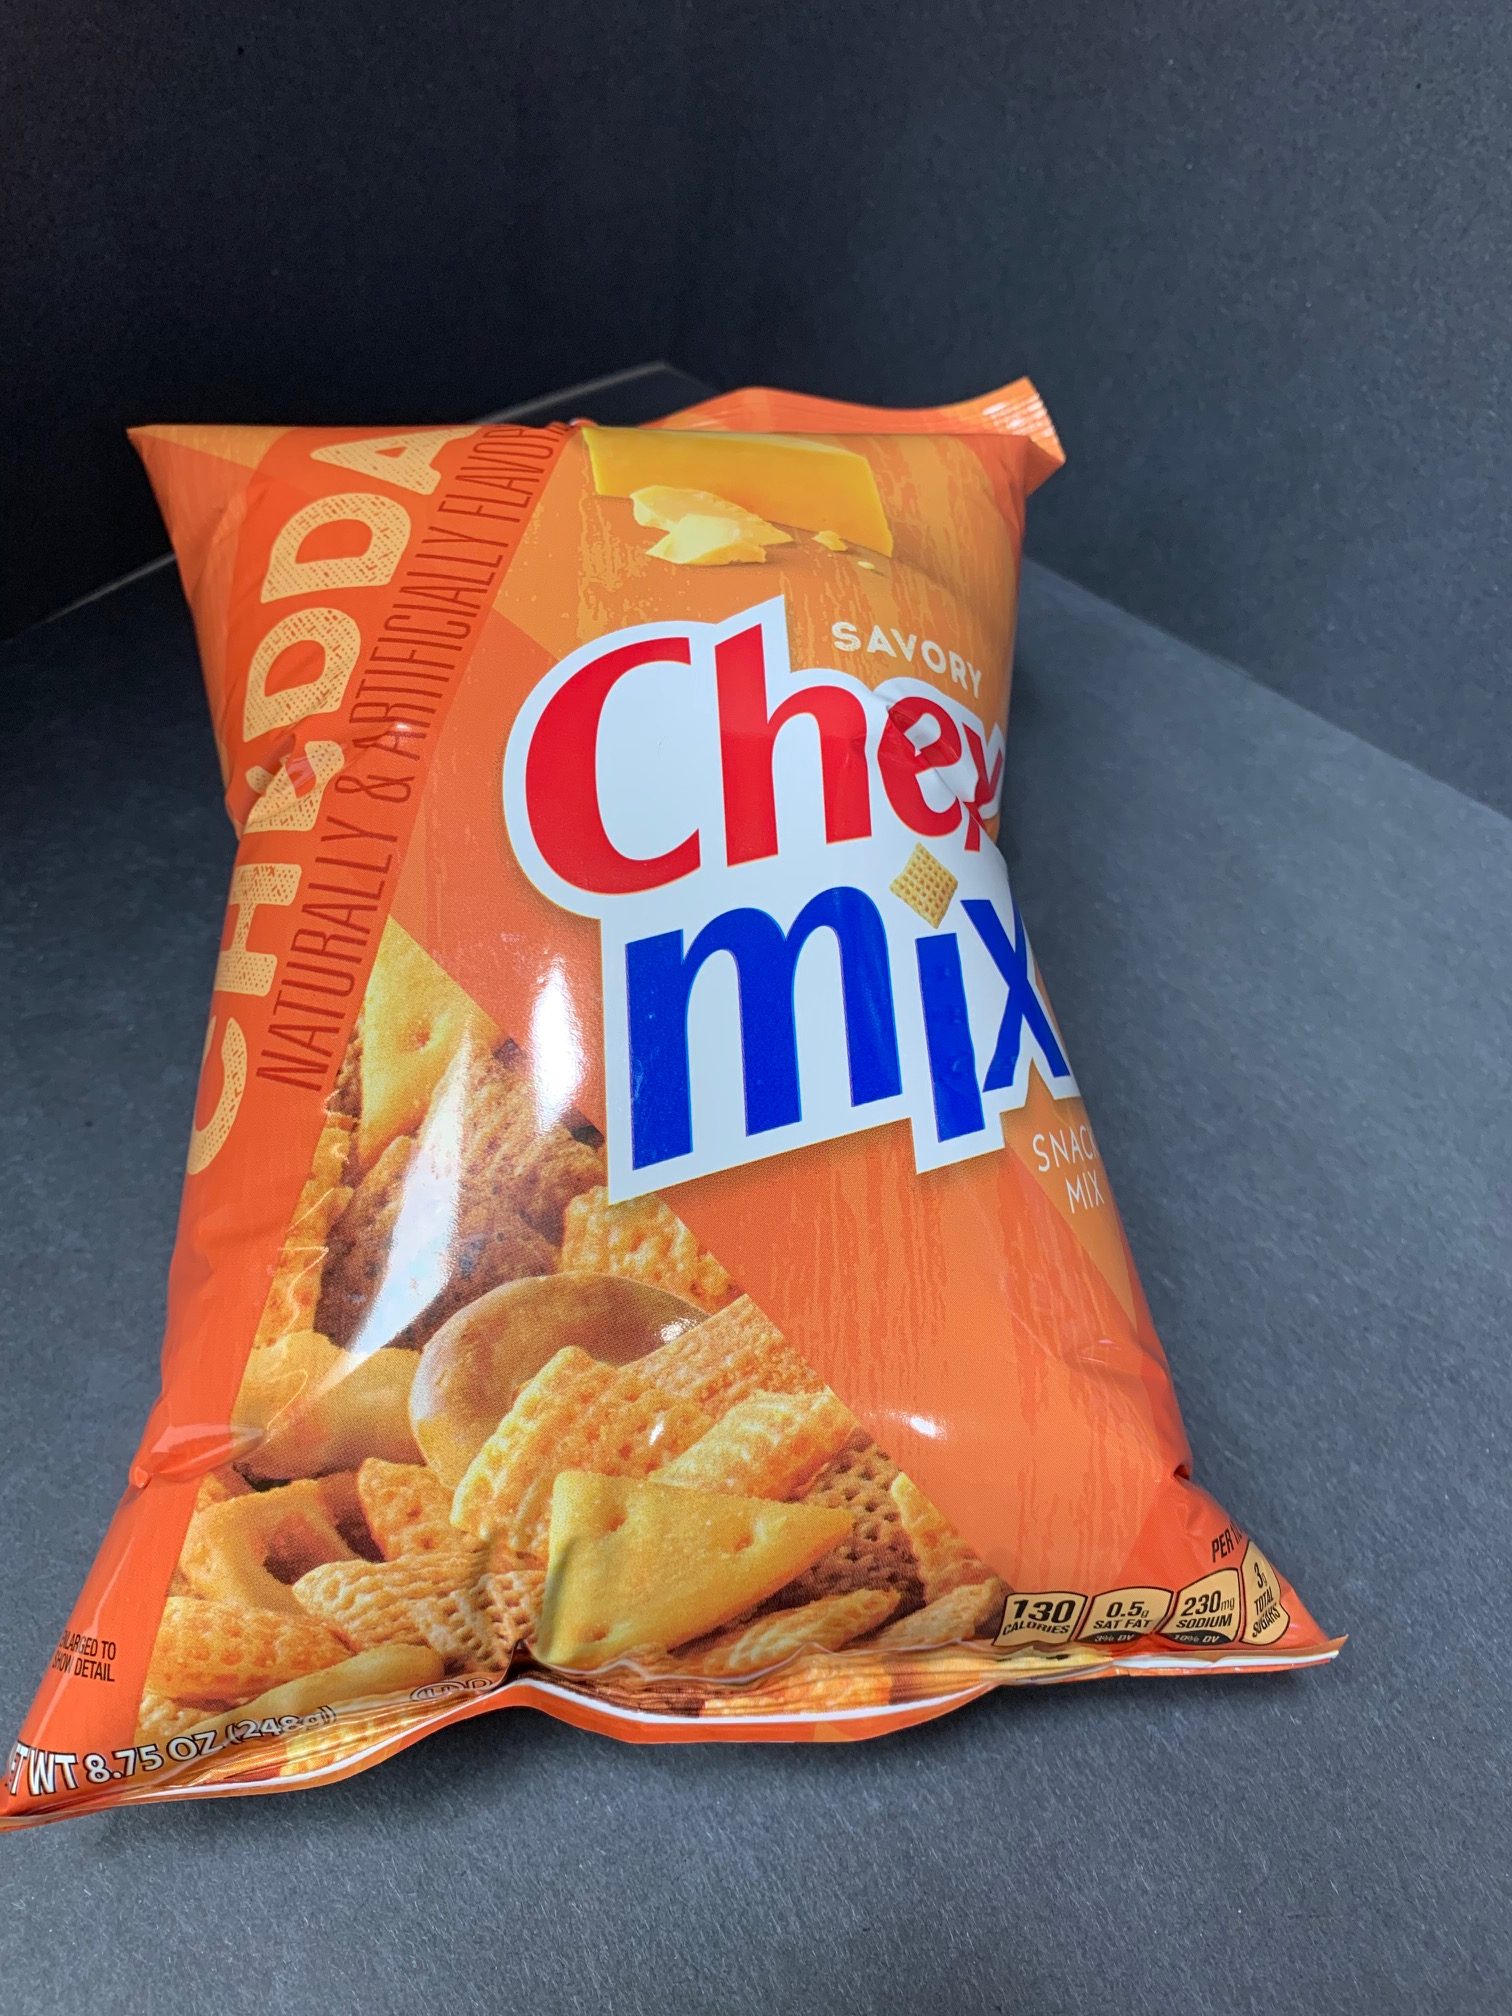 Chex mix-cheddar